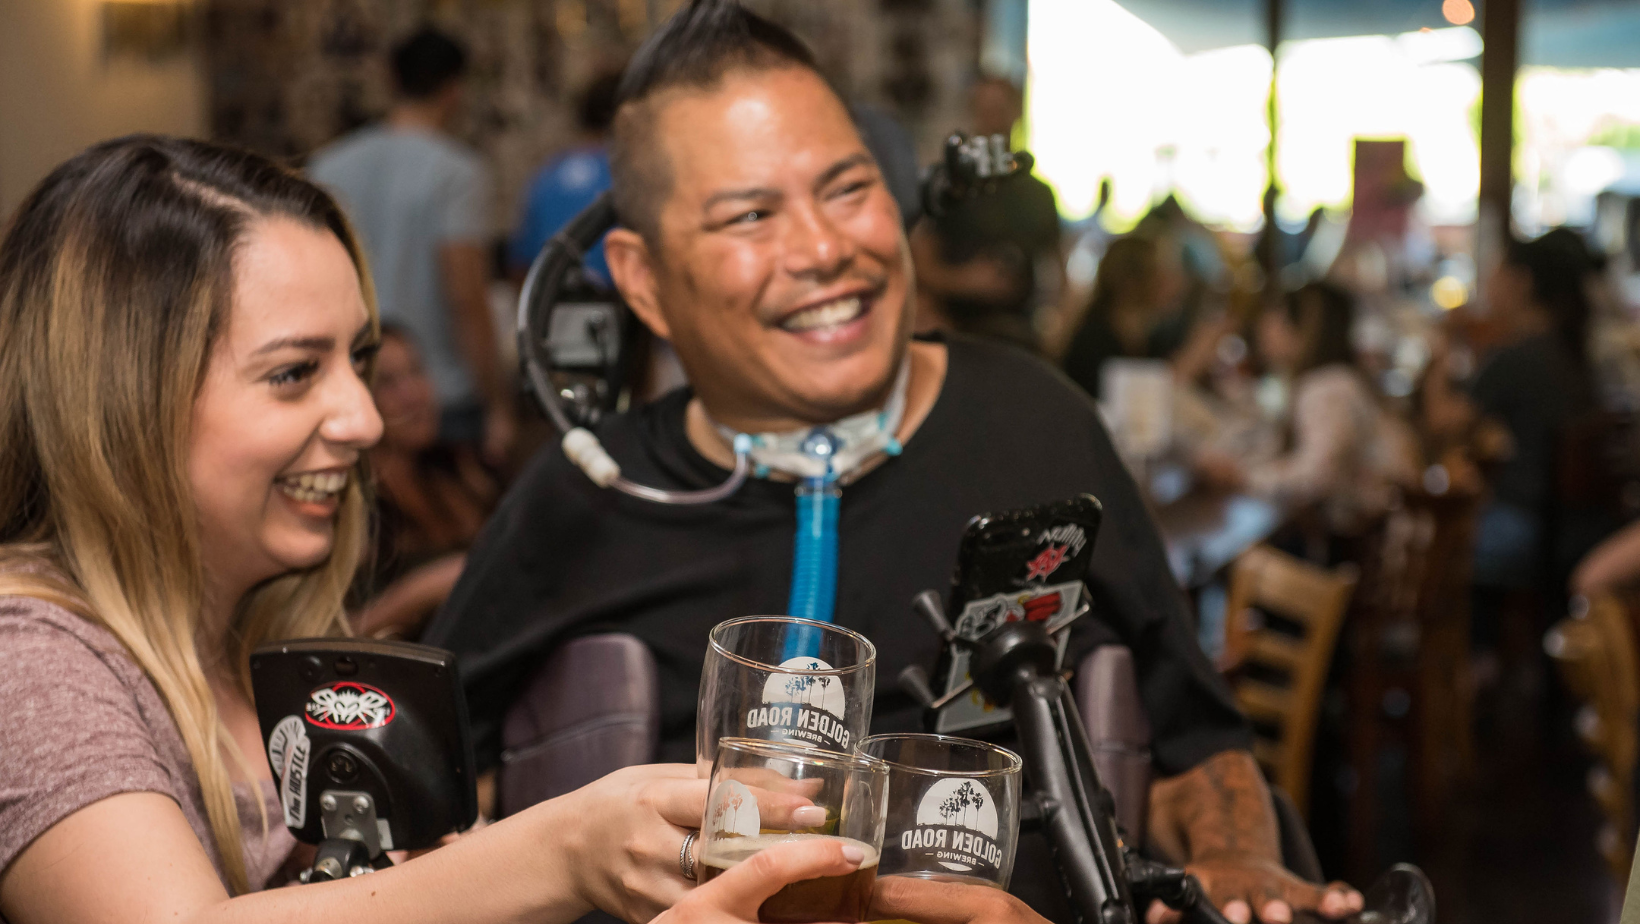 A man using a ventilator enjoys a brewery with his wife. 